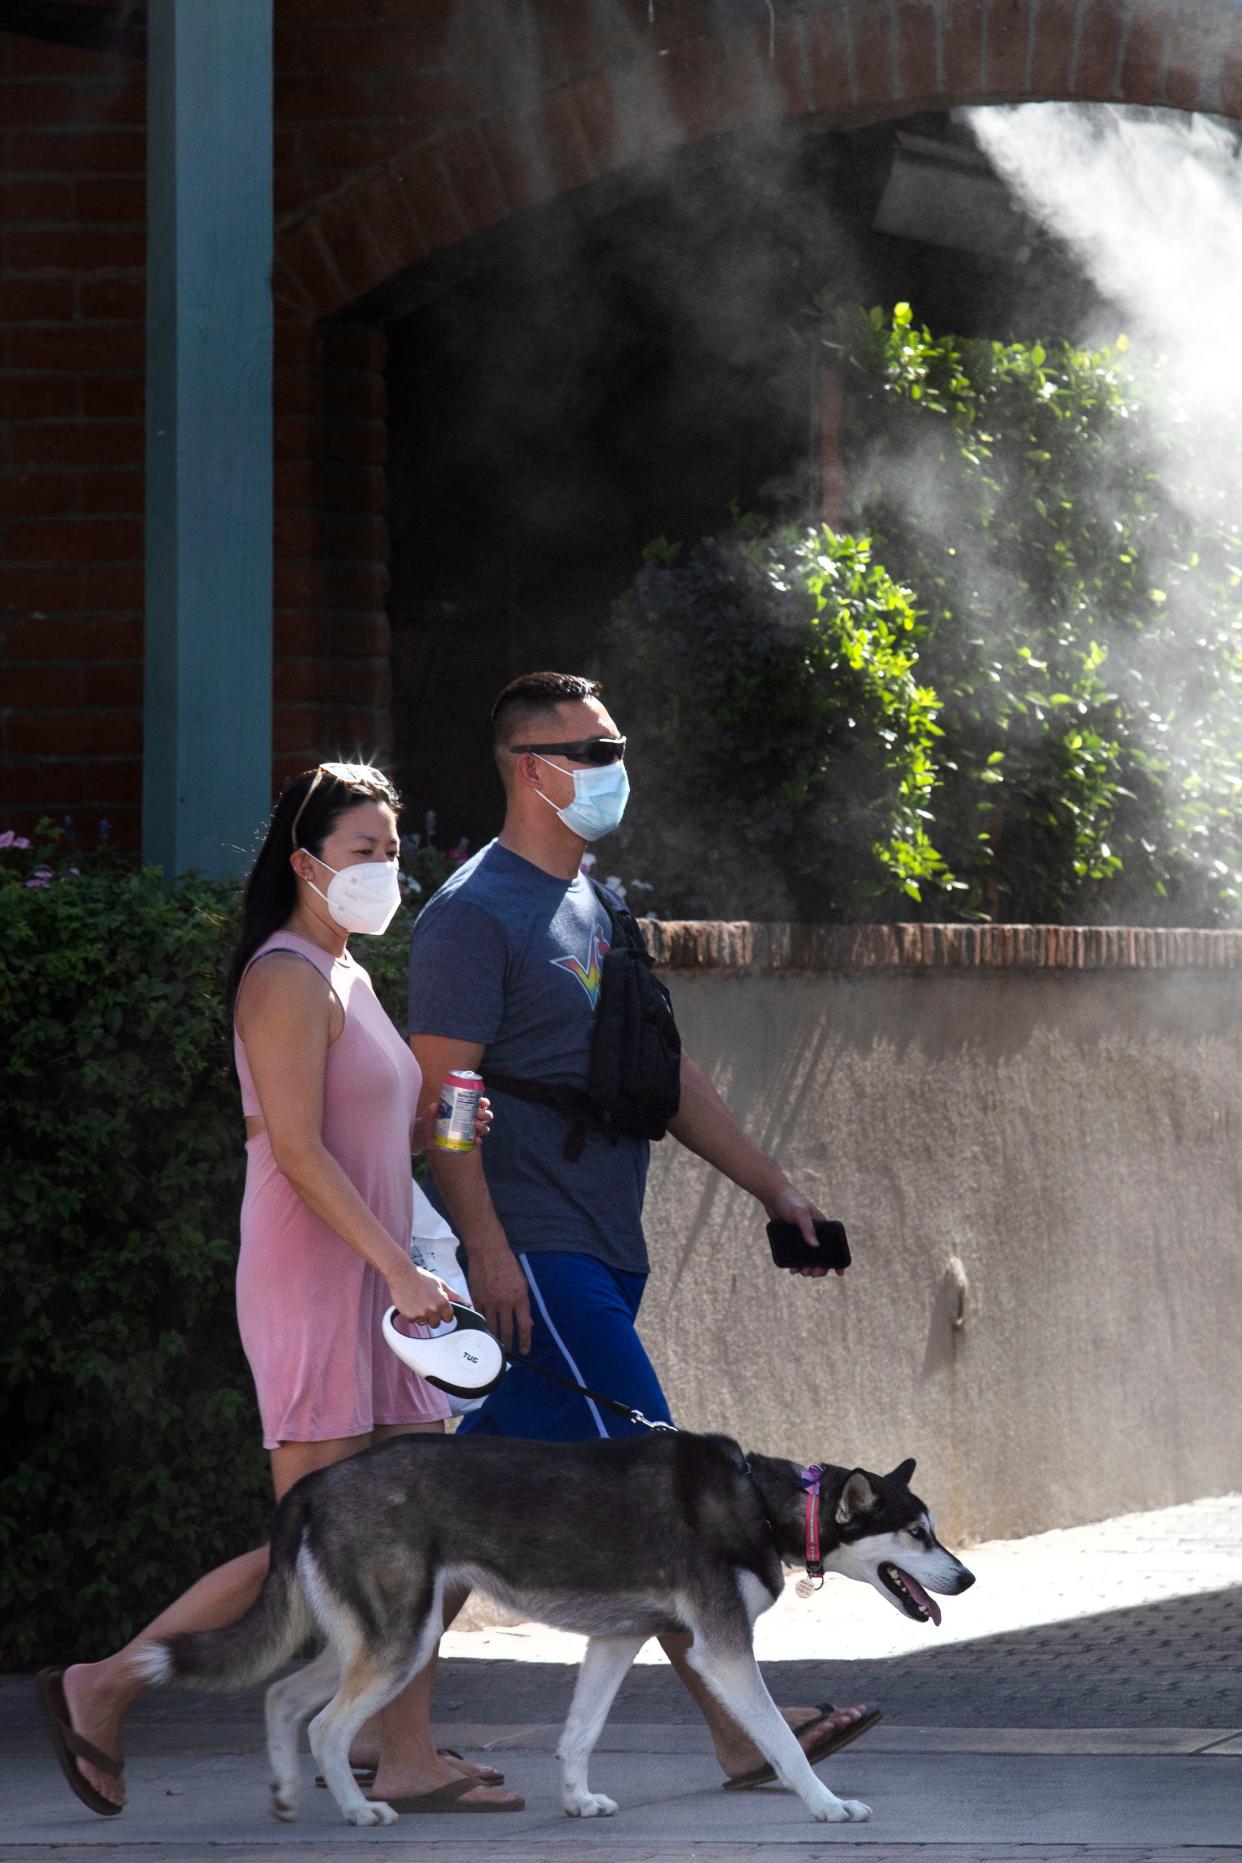 People walk their dog walk under misters on a triple-digit day along Palm Canyon Drive in downtown Palm Springs, Calif., on Saturday, June 5, 2021. The Coachella Valley will get a break from summer-like heat this week with temperatures expected to peak in the 90s through Thursday before triple digits return by the weekend.